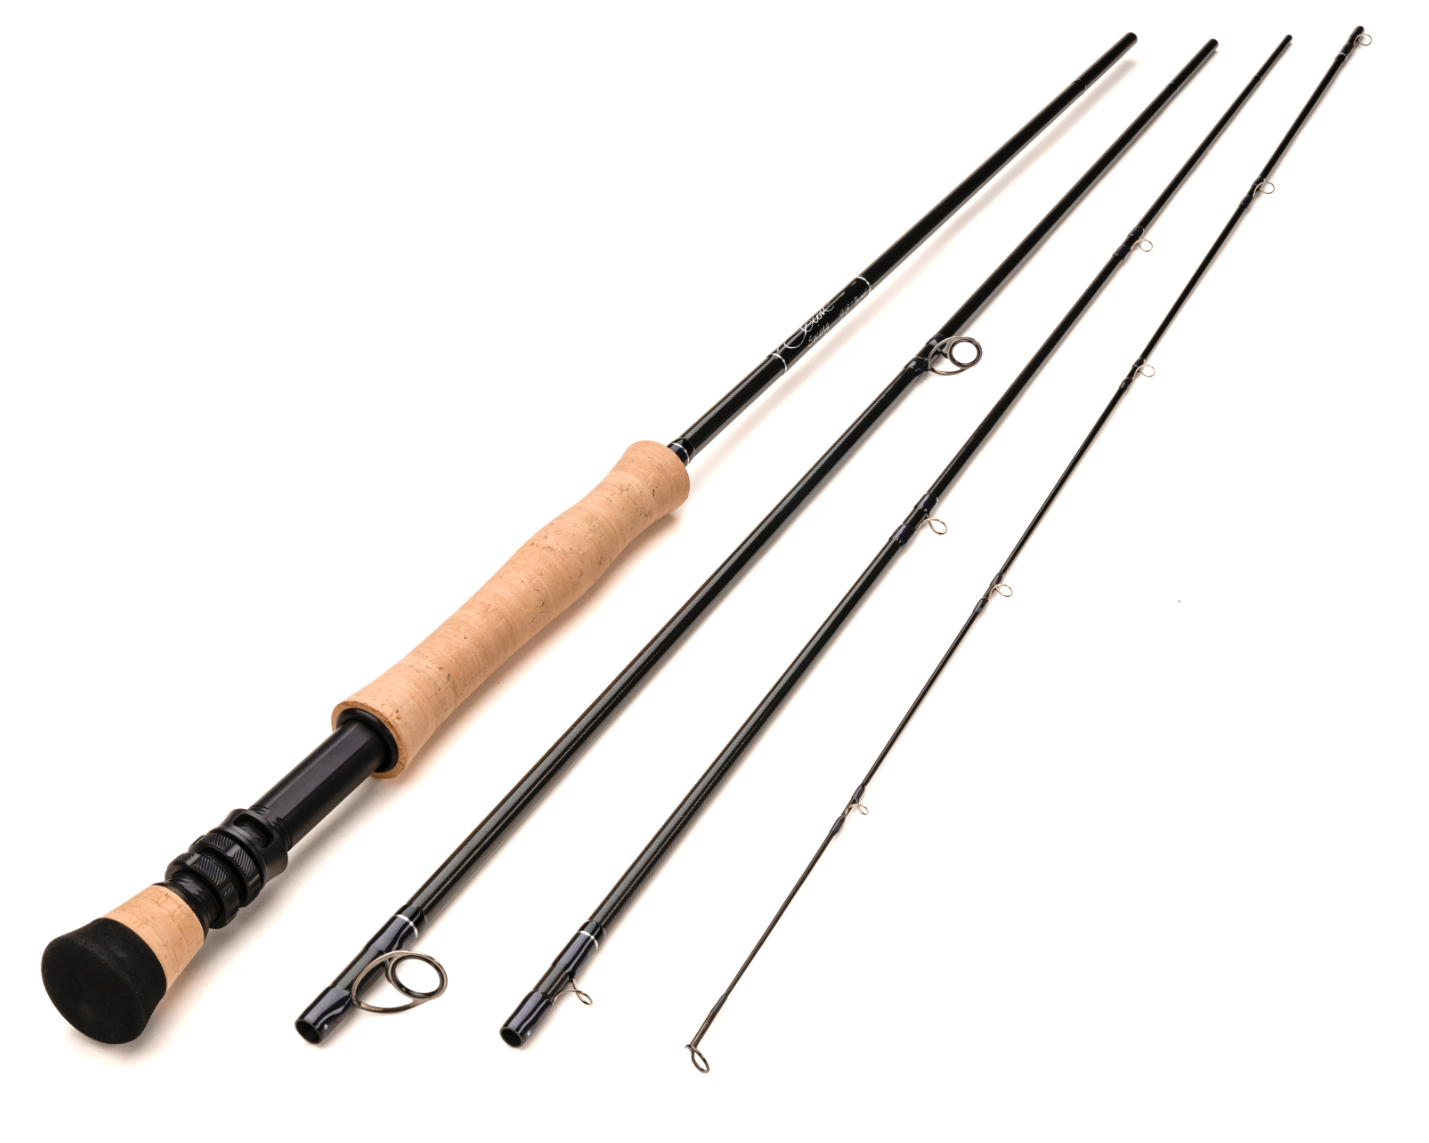 Scott Swing Fly Rod, expertly crafted for optimal performance in two-handed casting techniques